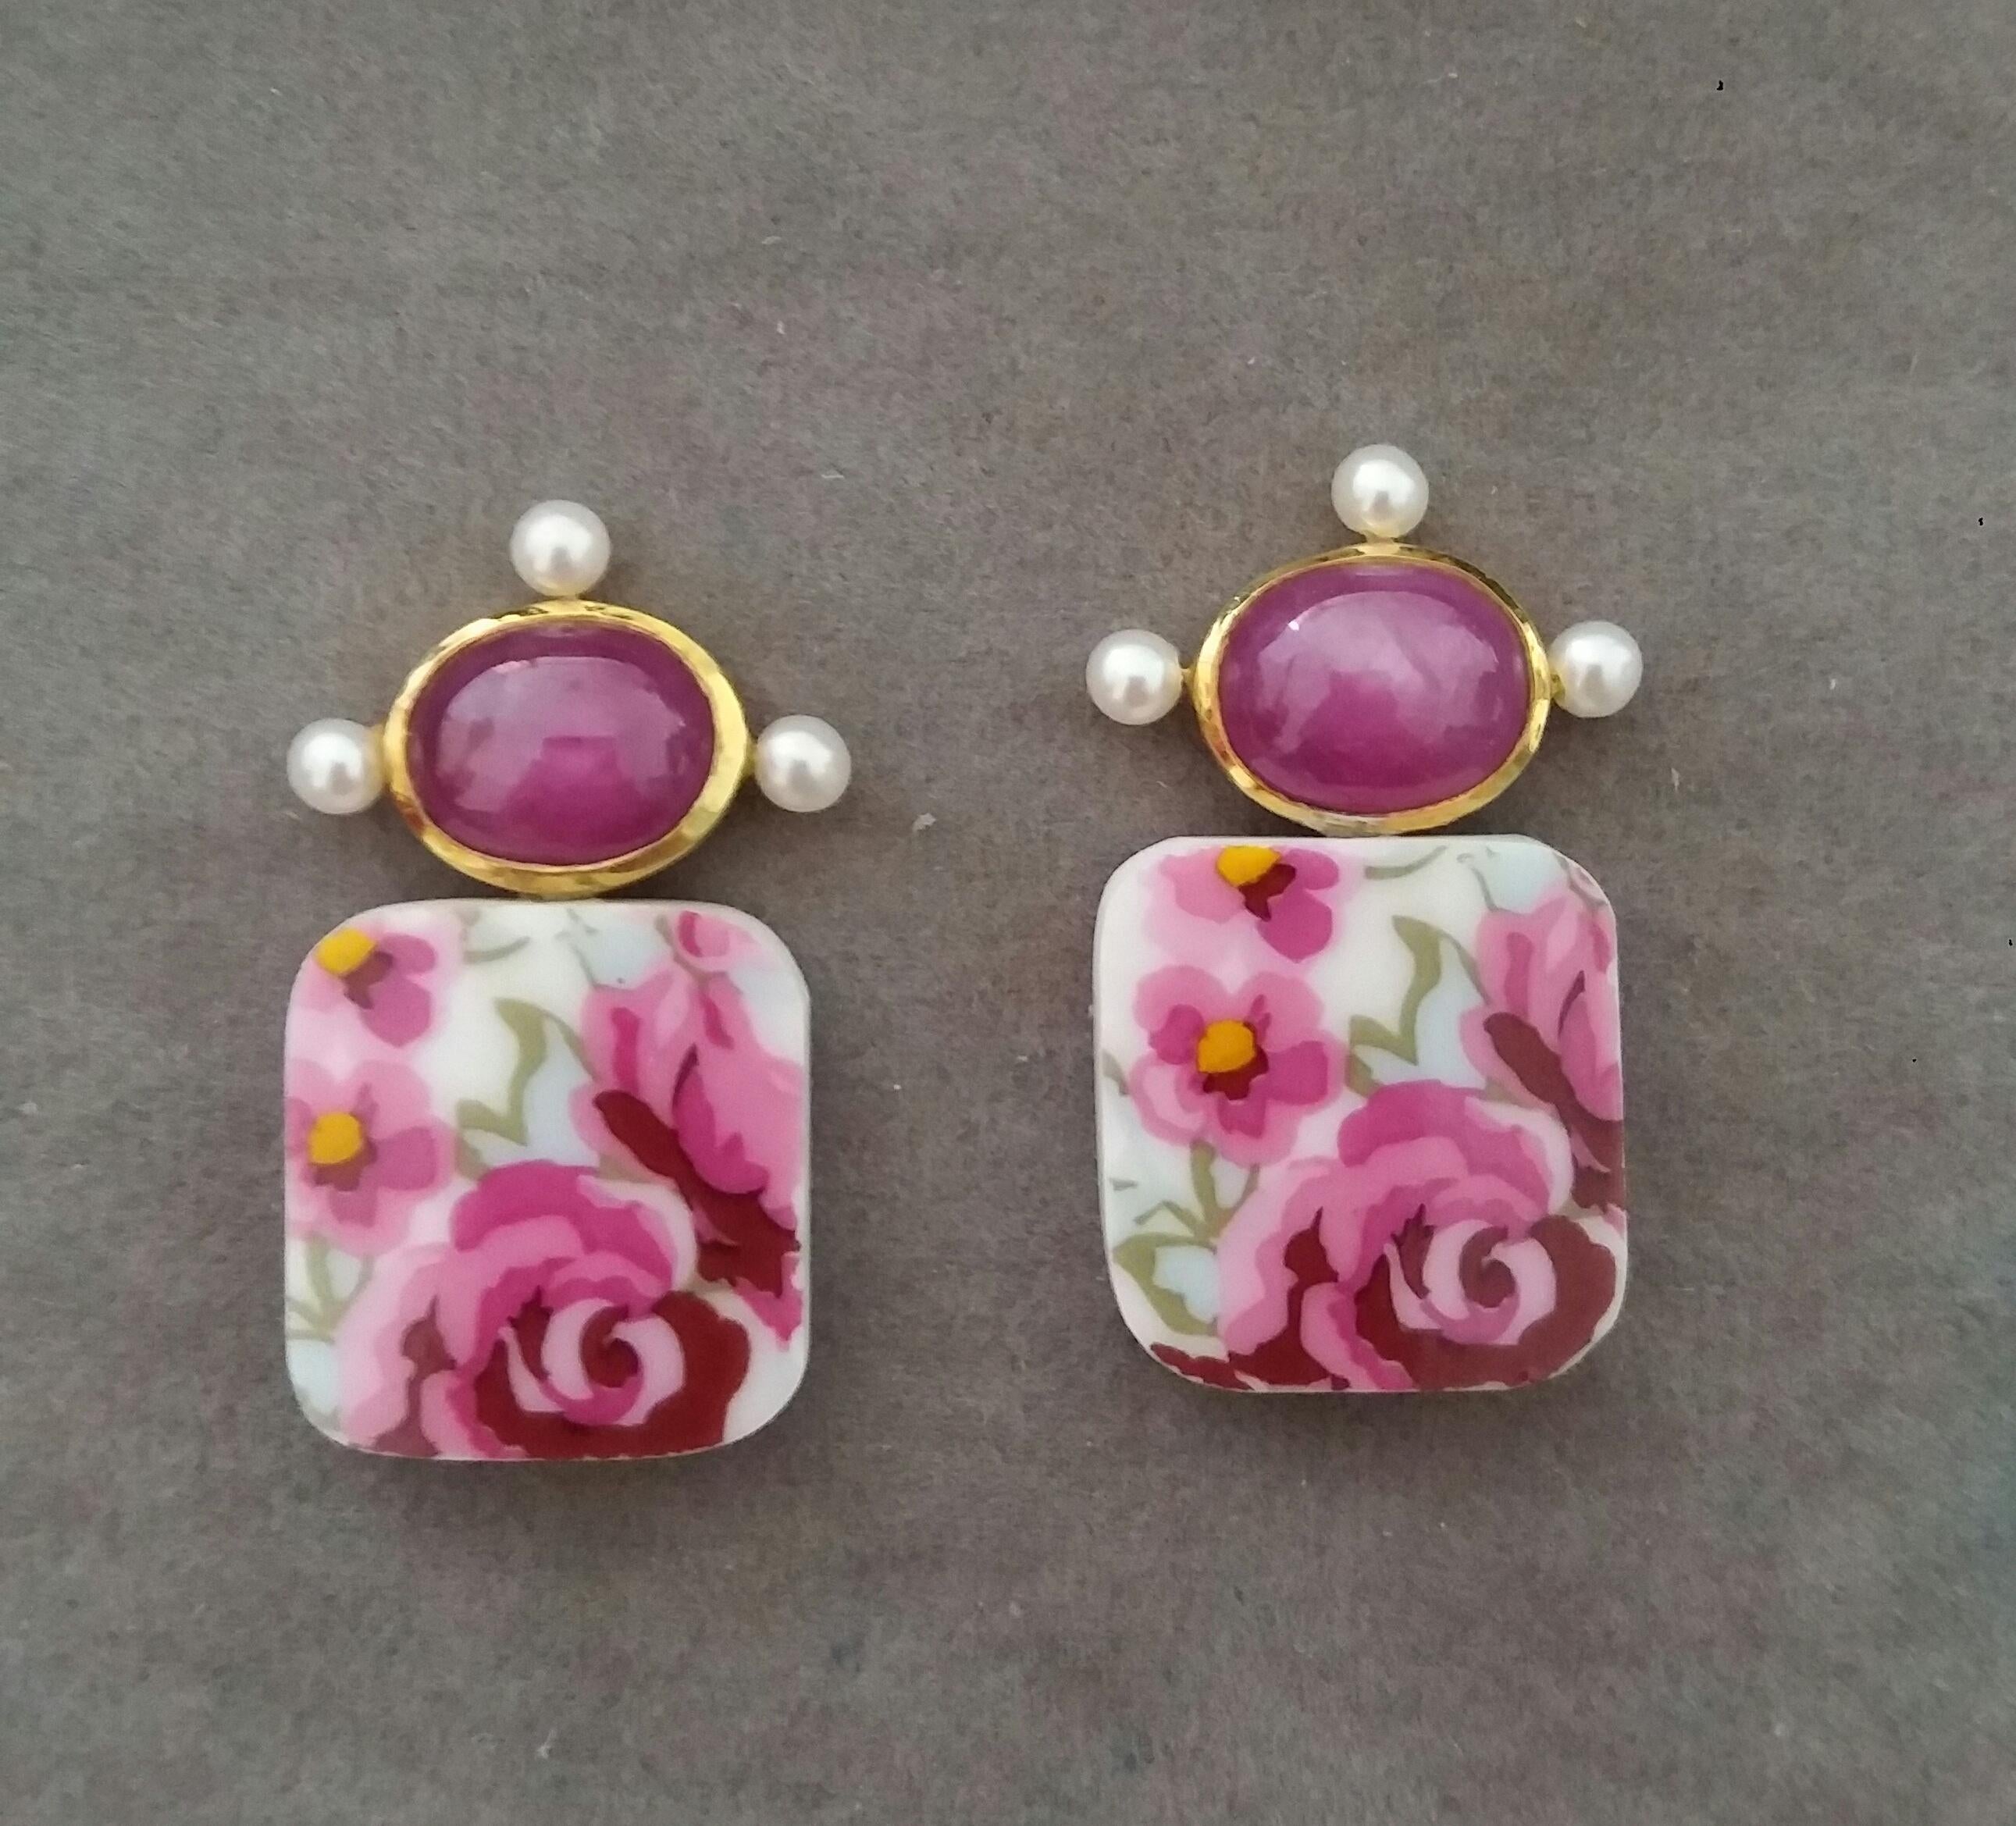 In these simple and chic earrings we have 2 Cushion Shape Ceramic measuring 16 x 17 mm.,suspended from 2 nice Natural Ruby oval cabochons size 8 x 10 mm  set in a 14 kt yellow gold bezel,with 3 small round fresh water pearls of 3 mm in diameter.

In